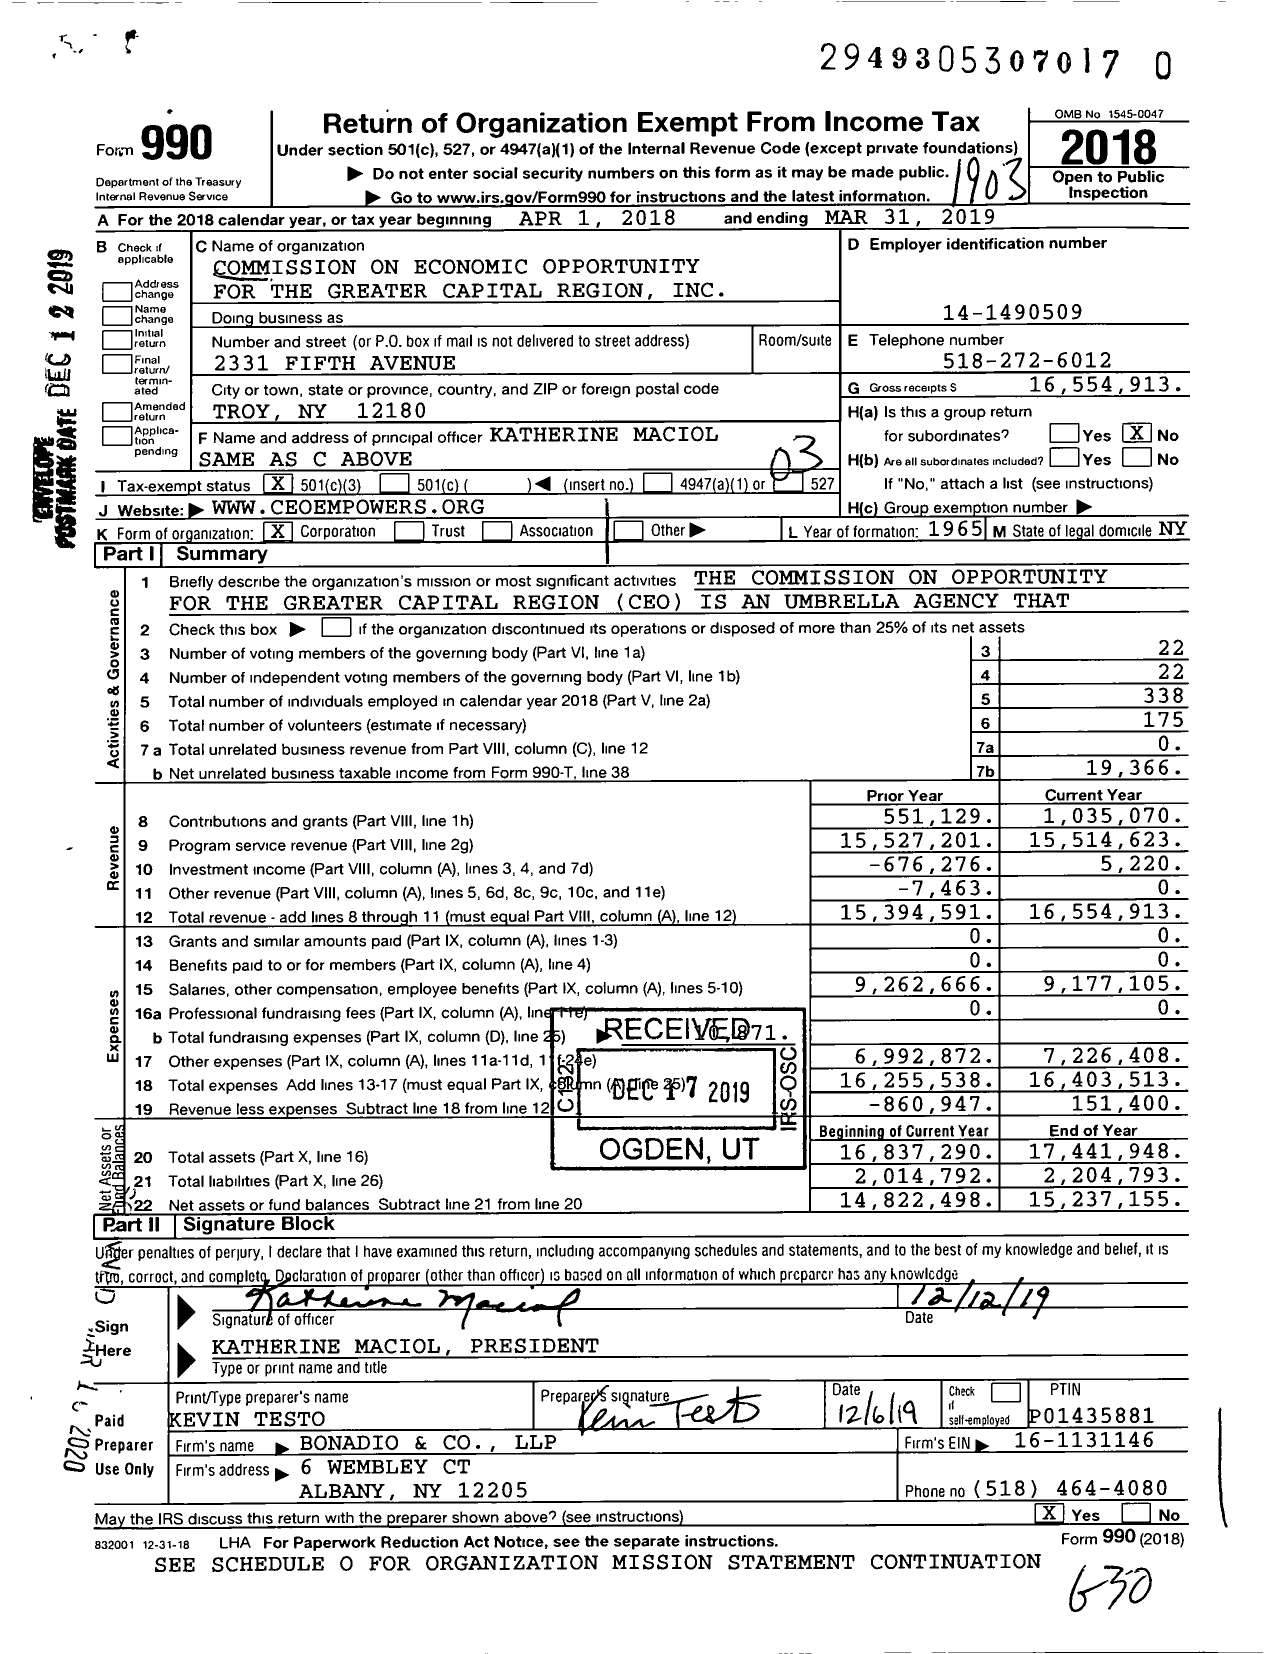 Image of first page of 2018 Form 990 for Commission on Economic Opportunity for the Greater Capital Region (CEO)